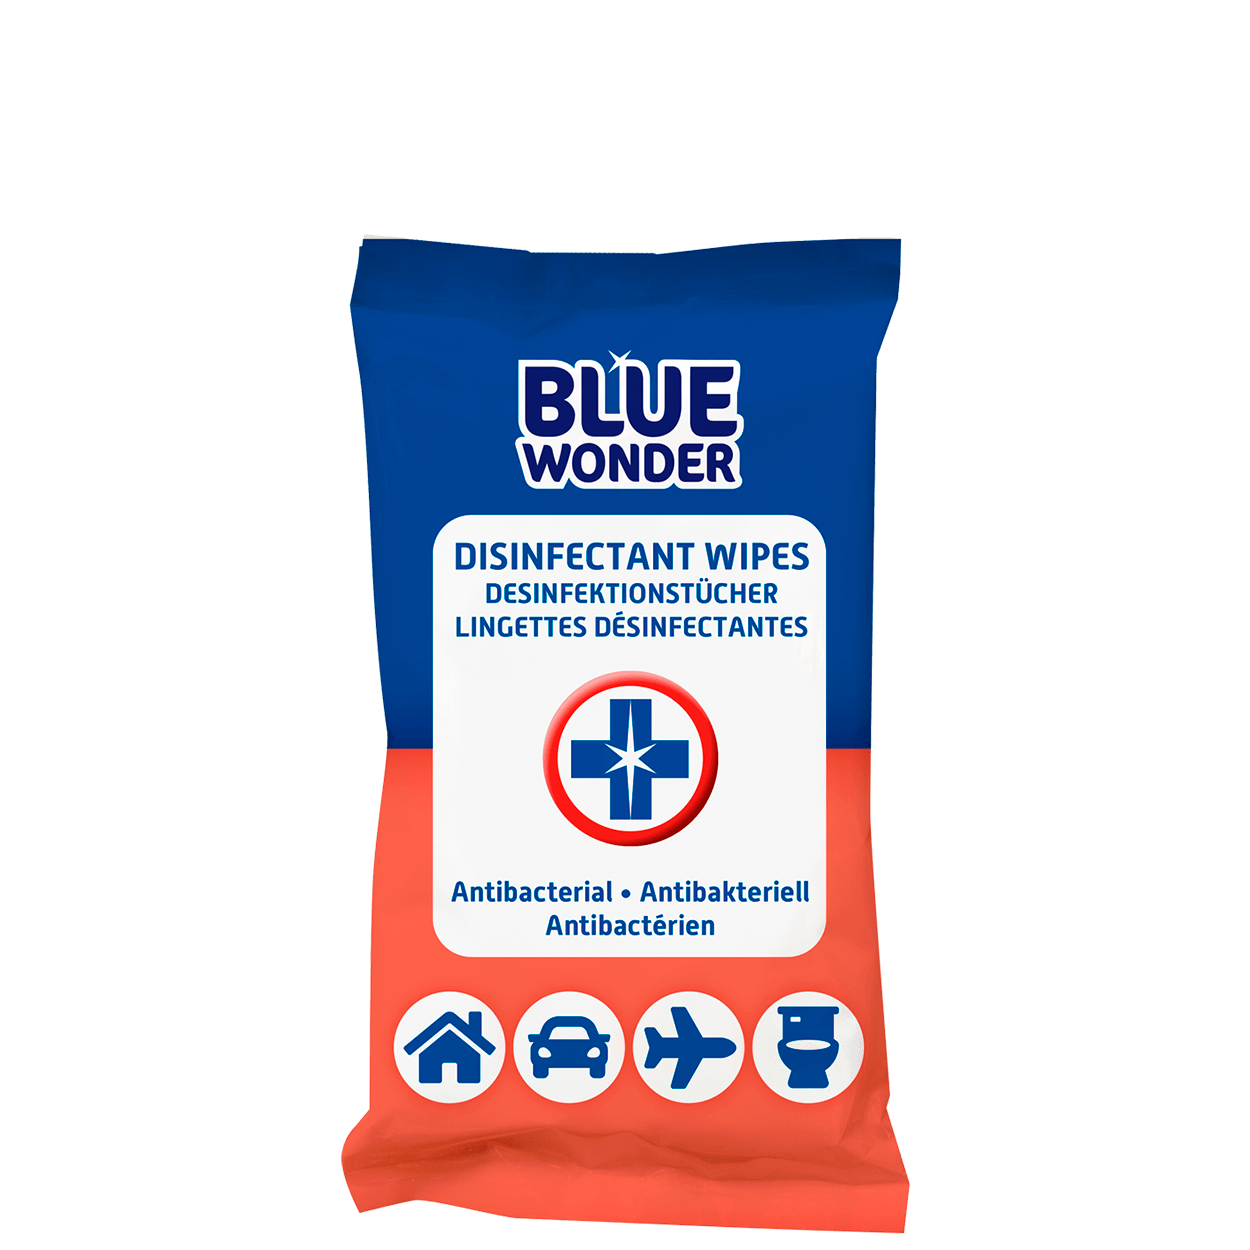 Blue Wonder Disinfectant Wipes, ideal for quick daily cleans and unique because they clean and disinfect at the same time. Blue Wonder Disinfectant Wipes are suitable for daily cleaning of counter tops, the toilet, the bathroom, door handles, tables, worktops, the fridge, toys and much more. Chlorine-free. Ready to use. Please note: test the wipes on an inconspicuous area before use. Reseal the pack carefully after use. The wipes can be thrown away with your household waste.